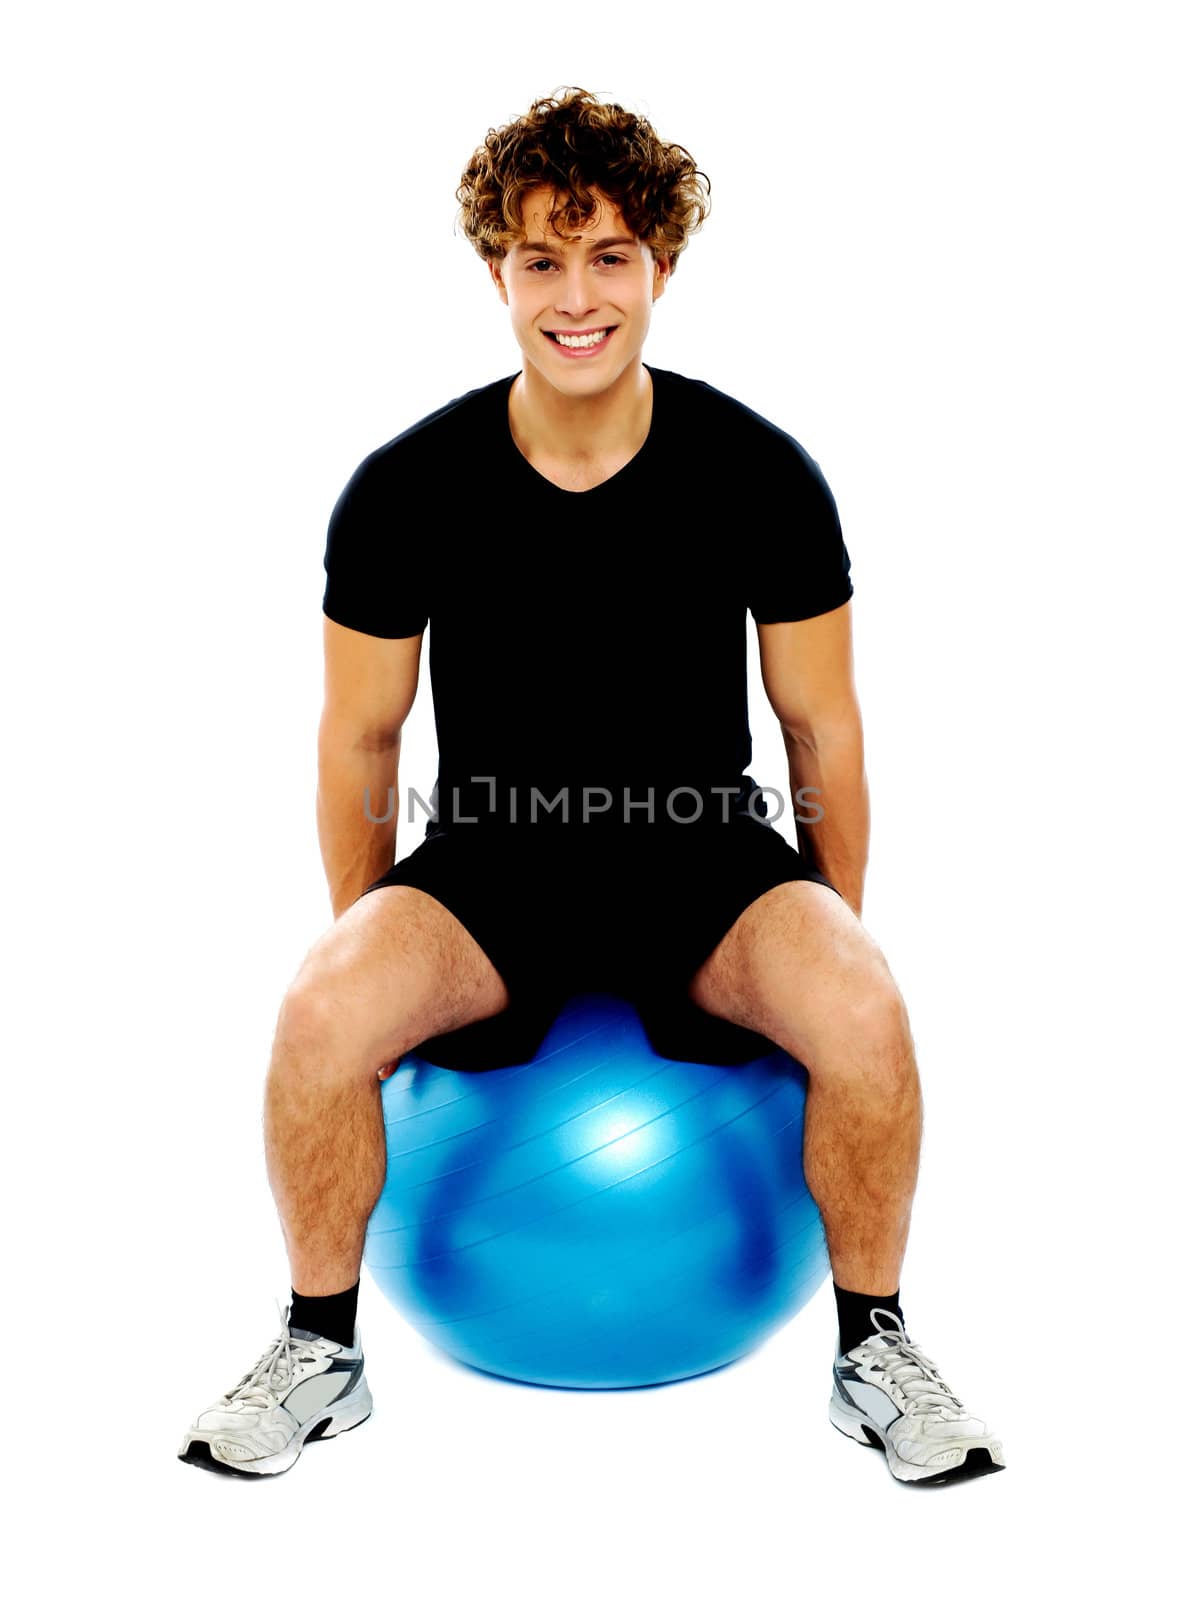 Handsome guy seated on exercise ball over white background